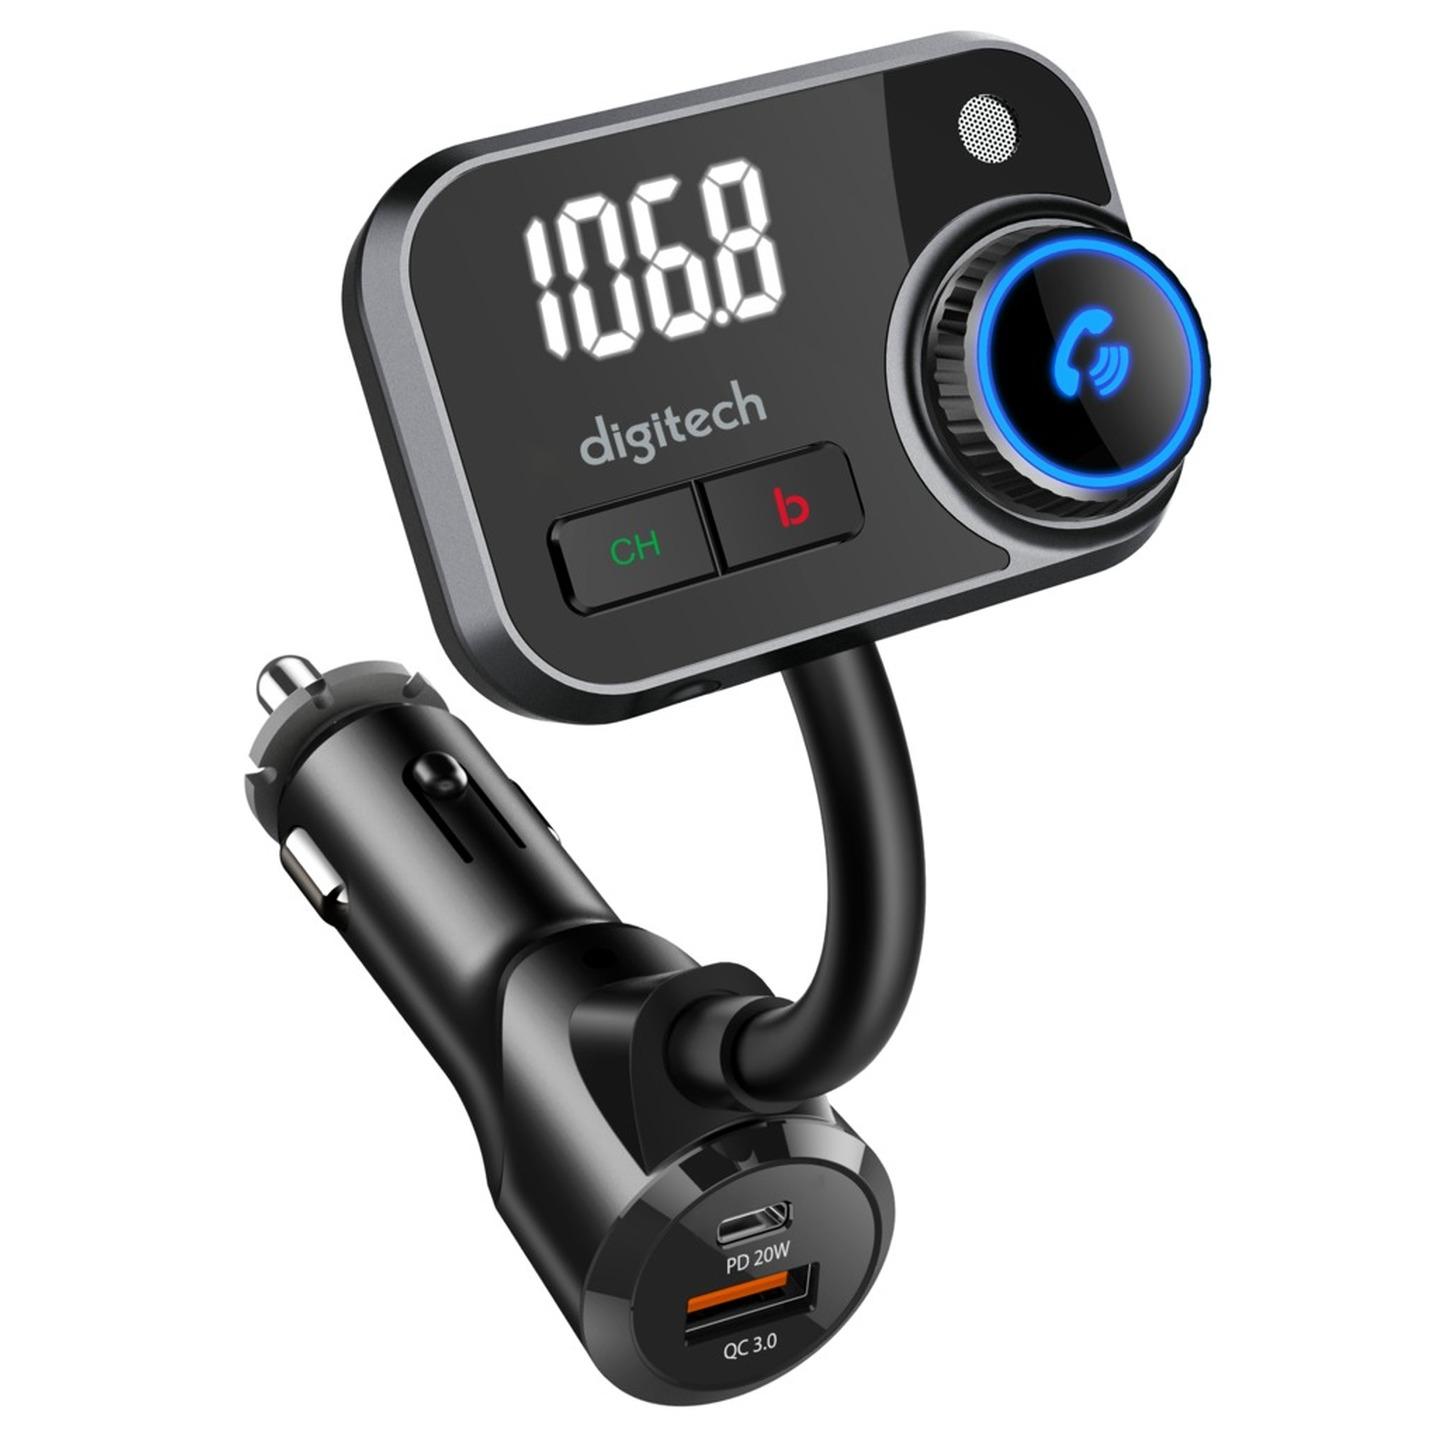 Digitech FM Transmitter with Bluetooth USB Type-C Power Delivery 20W and Qualcomm Quick Charge 3.0 USB